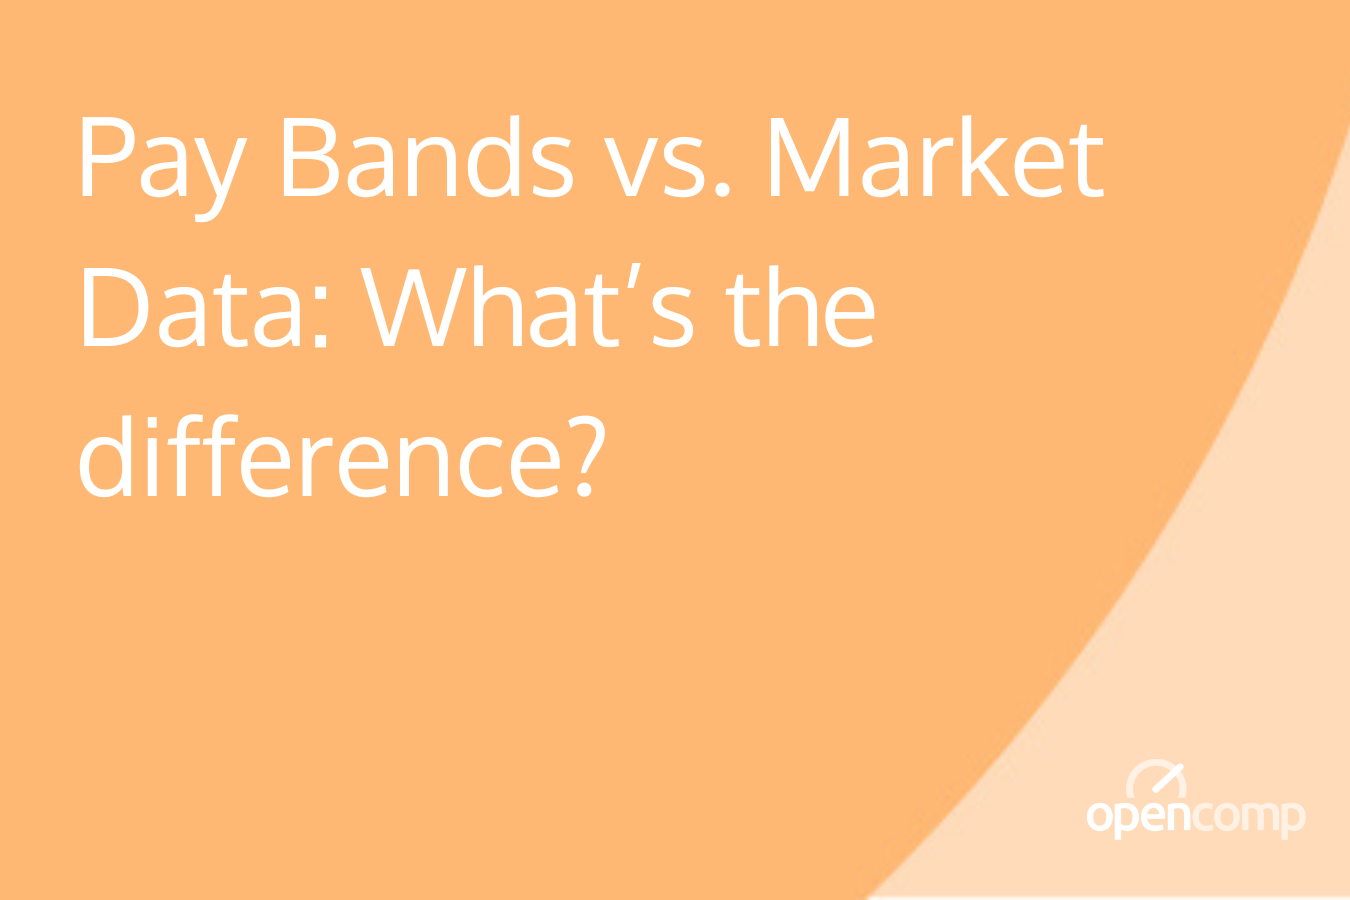 Pay Bands vs. Market Data Whats the difference